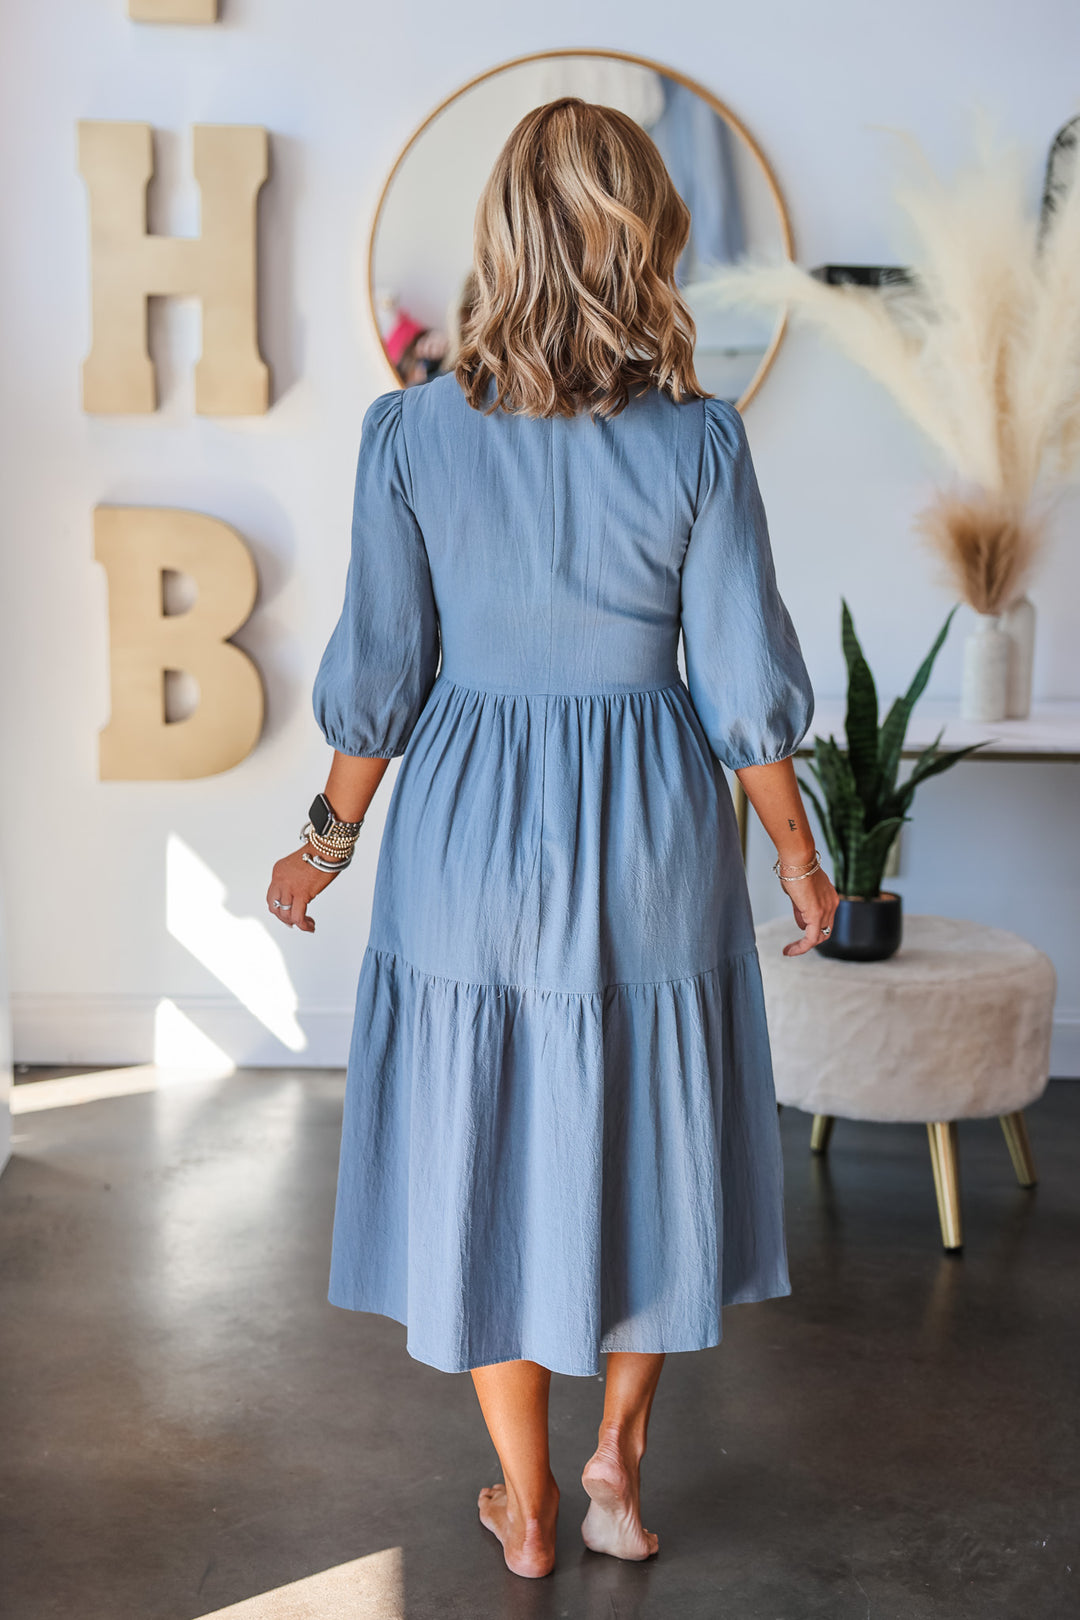 A blonde woman standing in a shop wearing a denim colored dress with 3/4 length sleeves, smocked bodice and tiered skirt. She is rear facing.